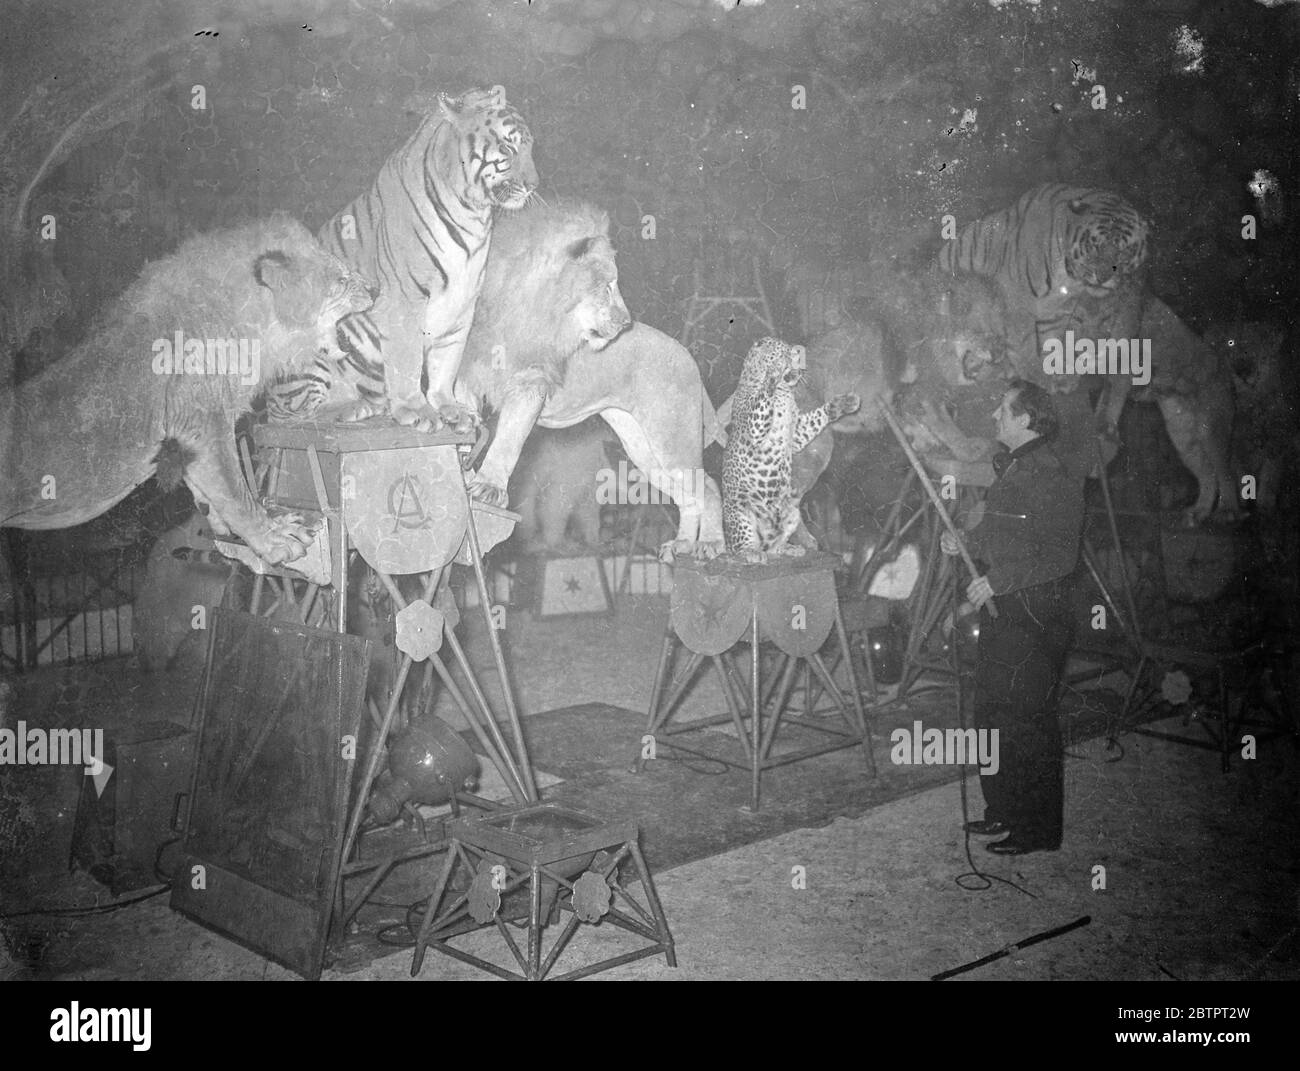 One man masters the wild!. Fifteen different animals, forest lions, tigers, leopards, polar and black bears performed together in the same 40 foot cage under the control of only one man, Alfred Court, at the Christmas circus at the Royal agricultural Hall, Islington, London. Photo shows, Alfred Court with his lions, tigers and leopards performing in the circus ring at the agricultural Hall. 20 December 1937 Stock Photo